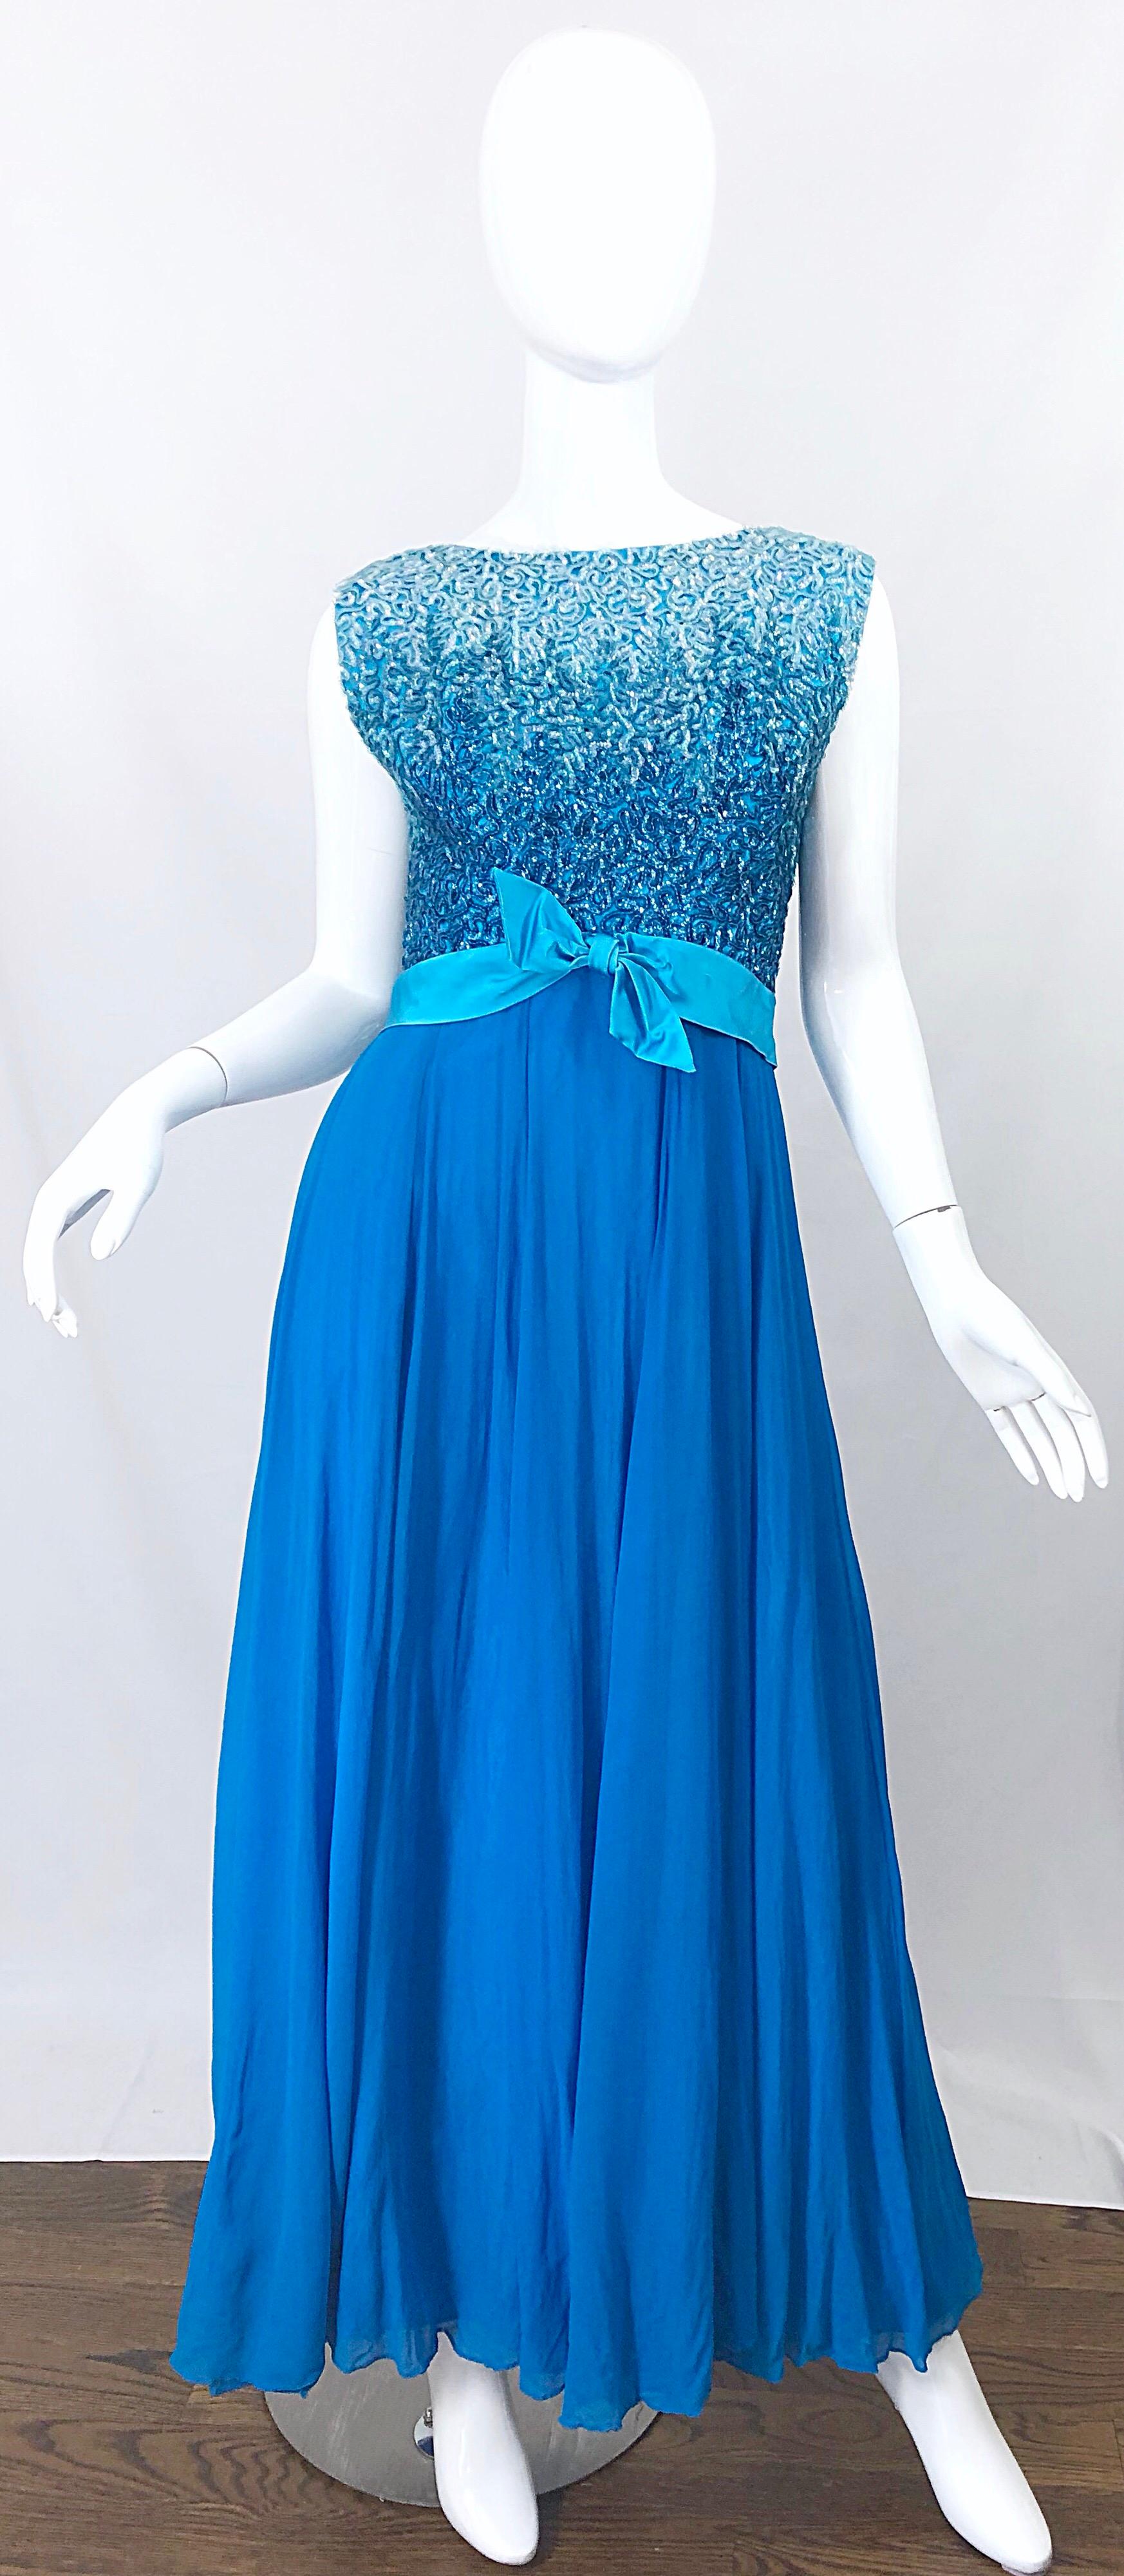 Stunning early 1960s EMMA DOMB turquoise blue silk chiffon ombre sequined evening gown! Bodice features thousands of 
hand-sewn sequins throughout the front and back. Full metal zipper up the back with hook-and-eye closure. Luxurious silk chiffon